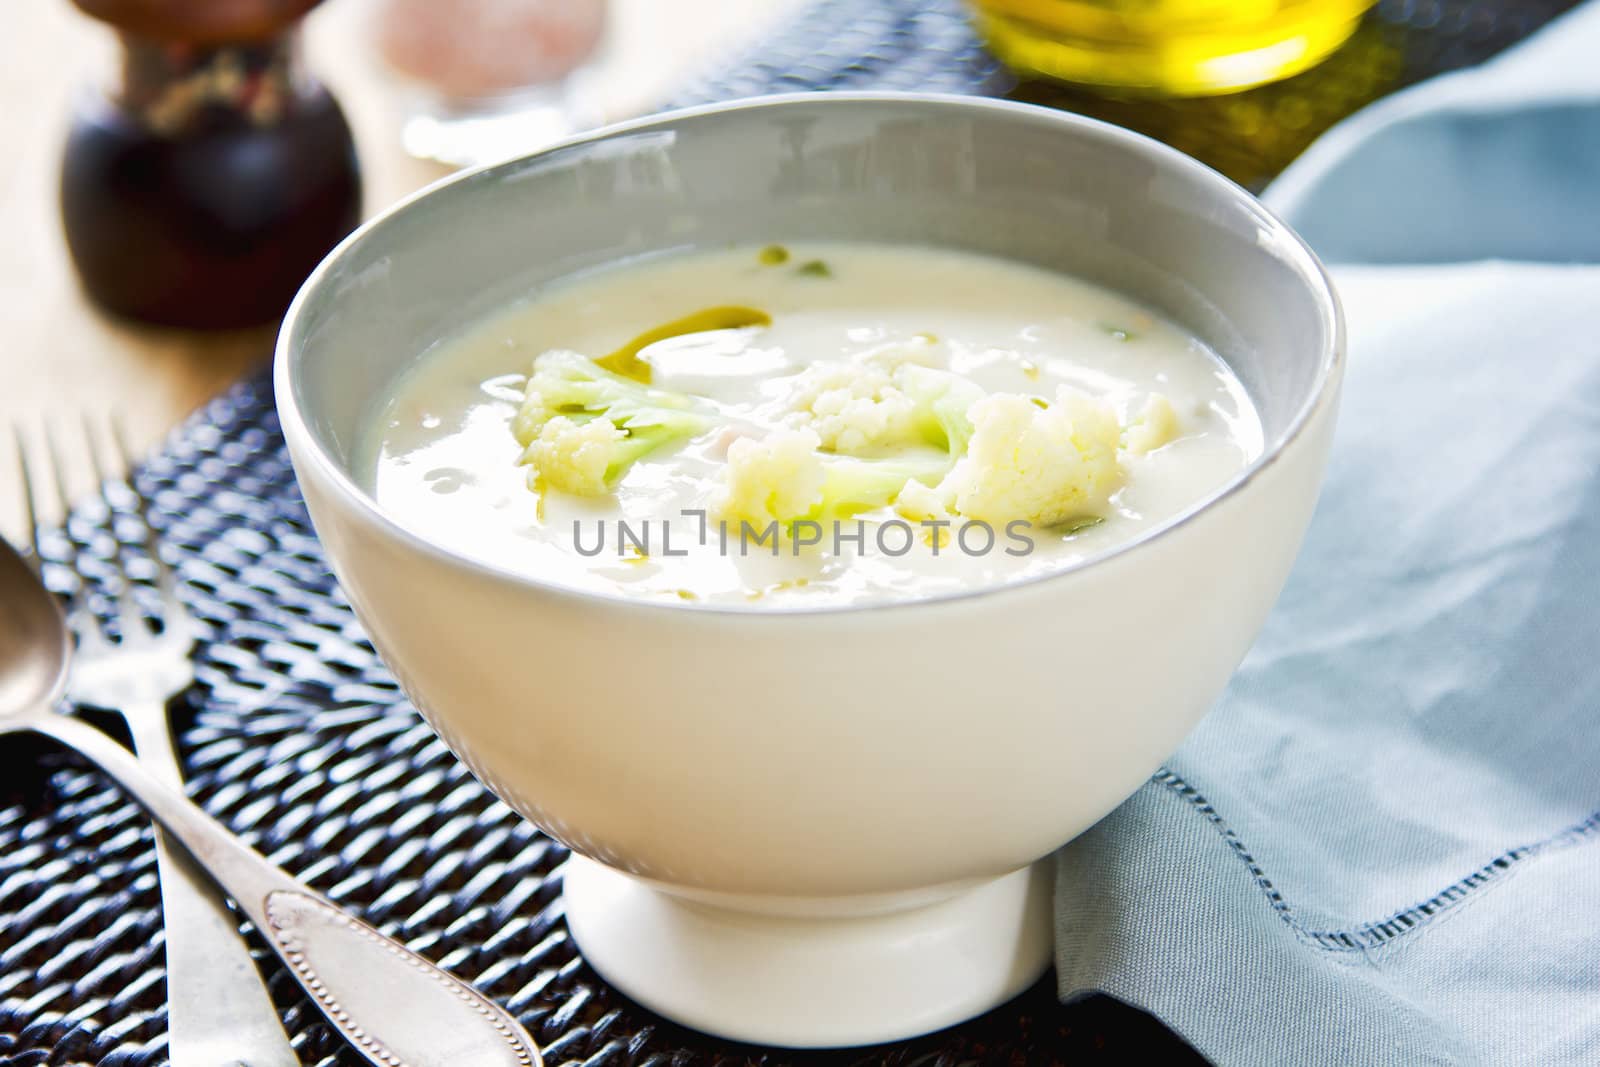 Cauliflower soup with some Cauliflower in a bowl